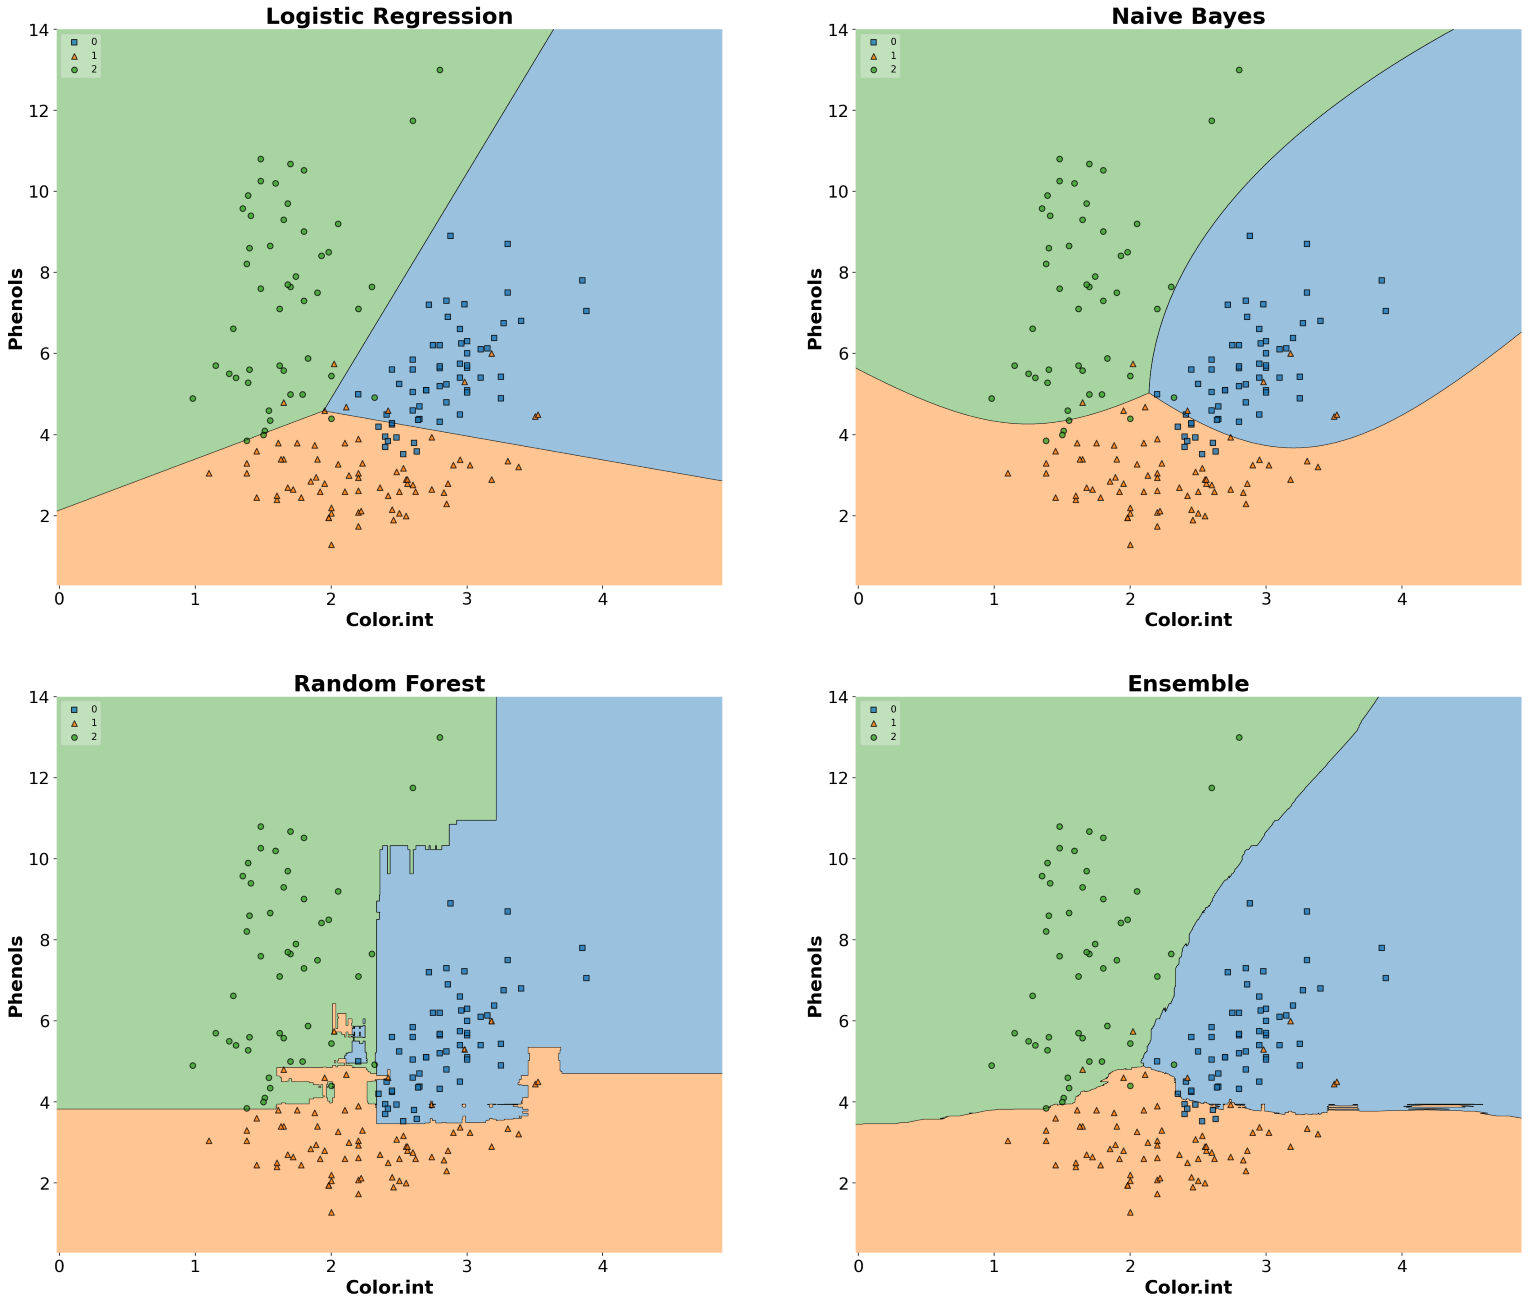 Decision regions of all classifiers